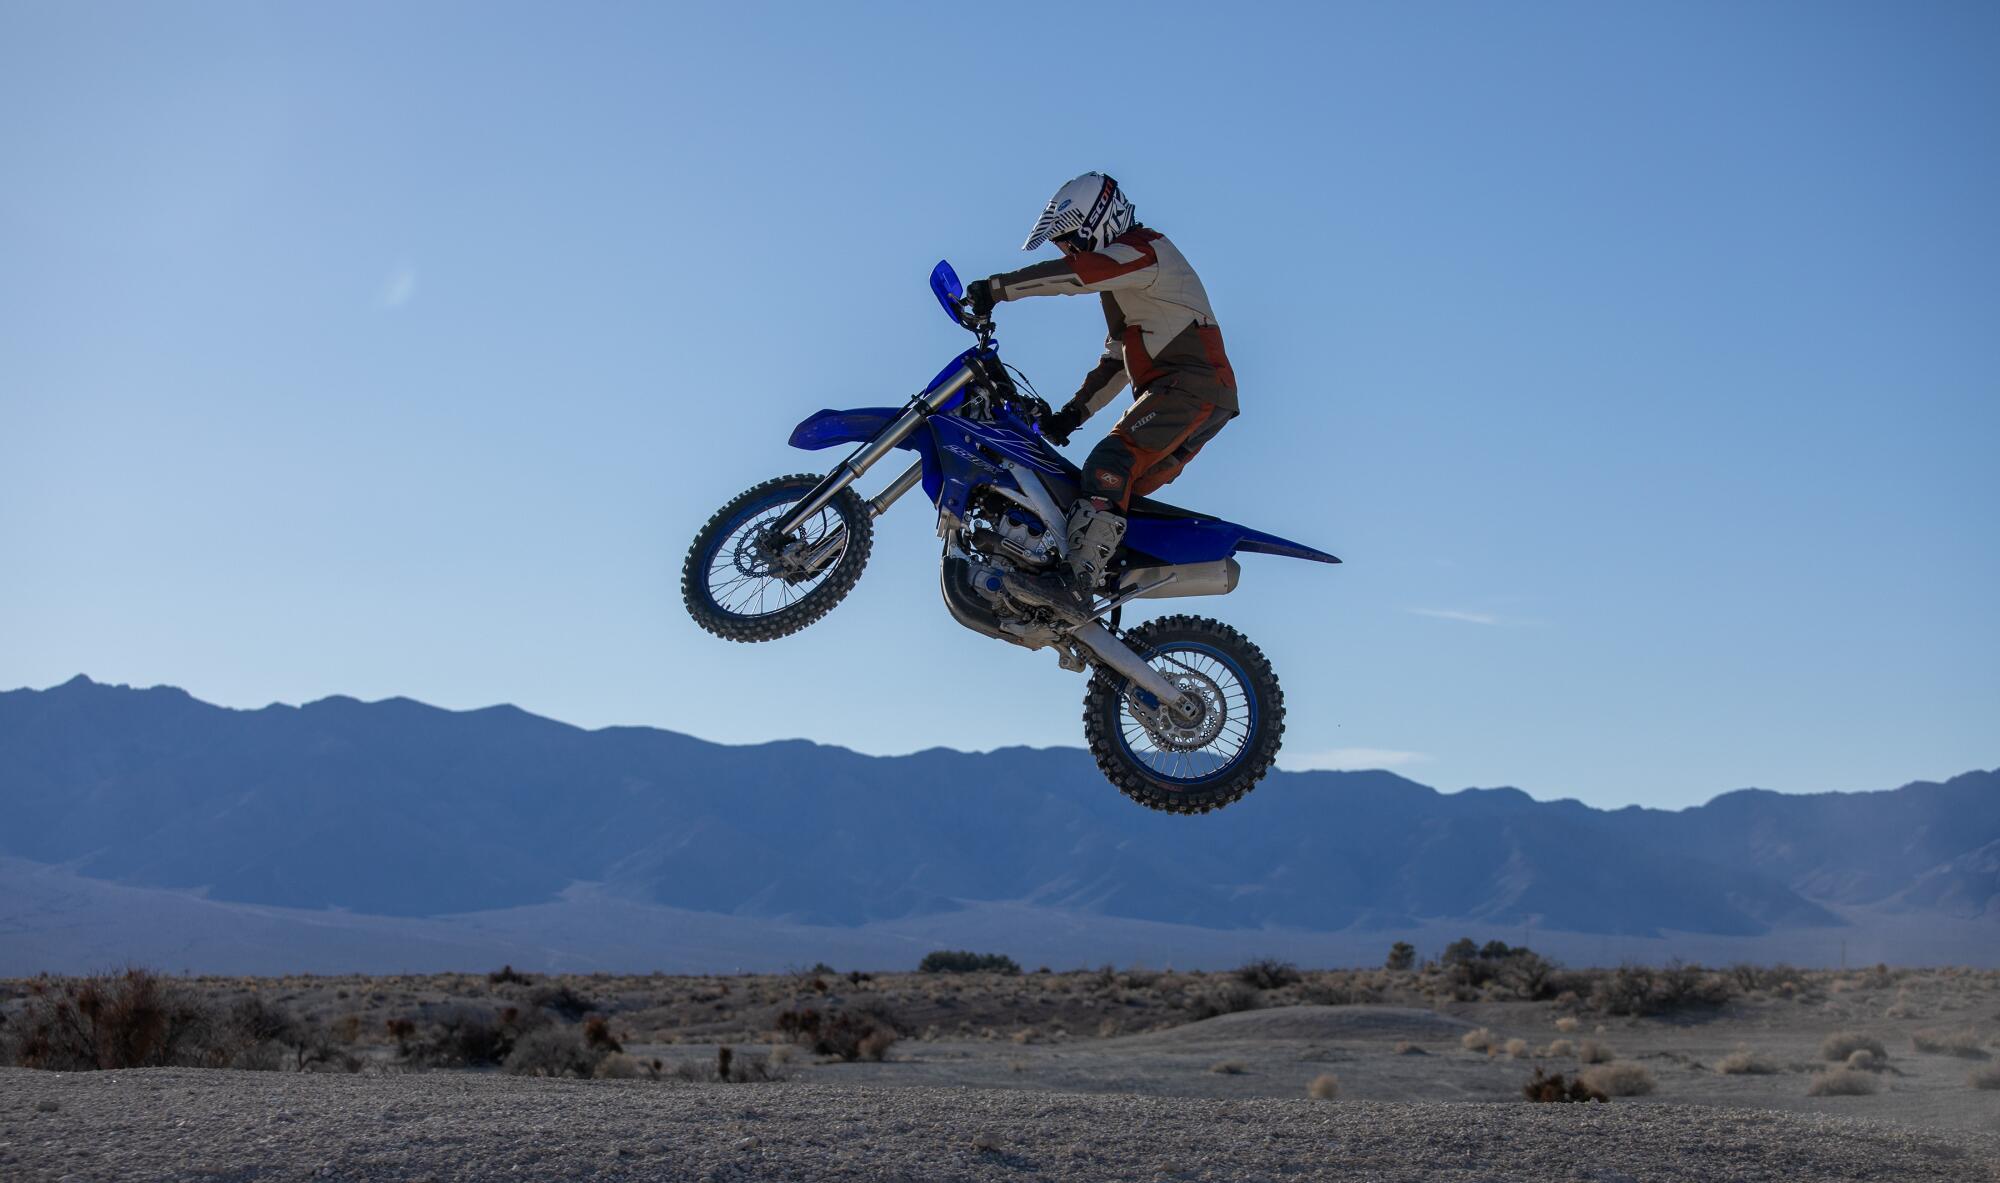 Off-road enthusiast Jimmy Lewis rides in the Nevada desert near his home in Pahrump.